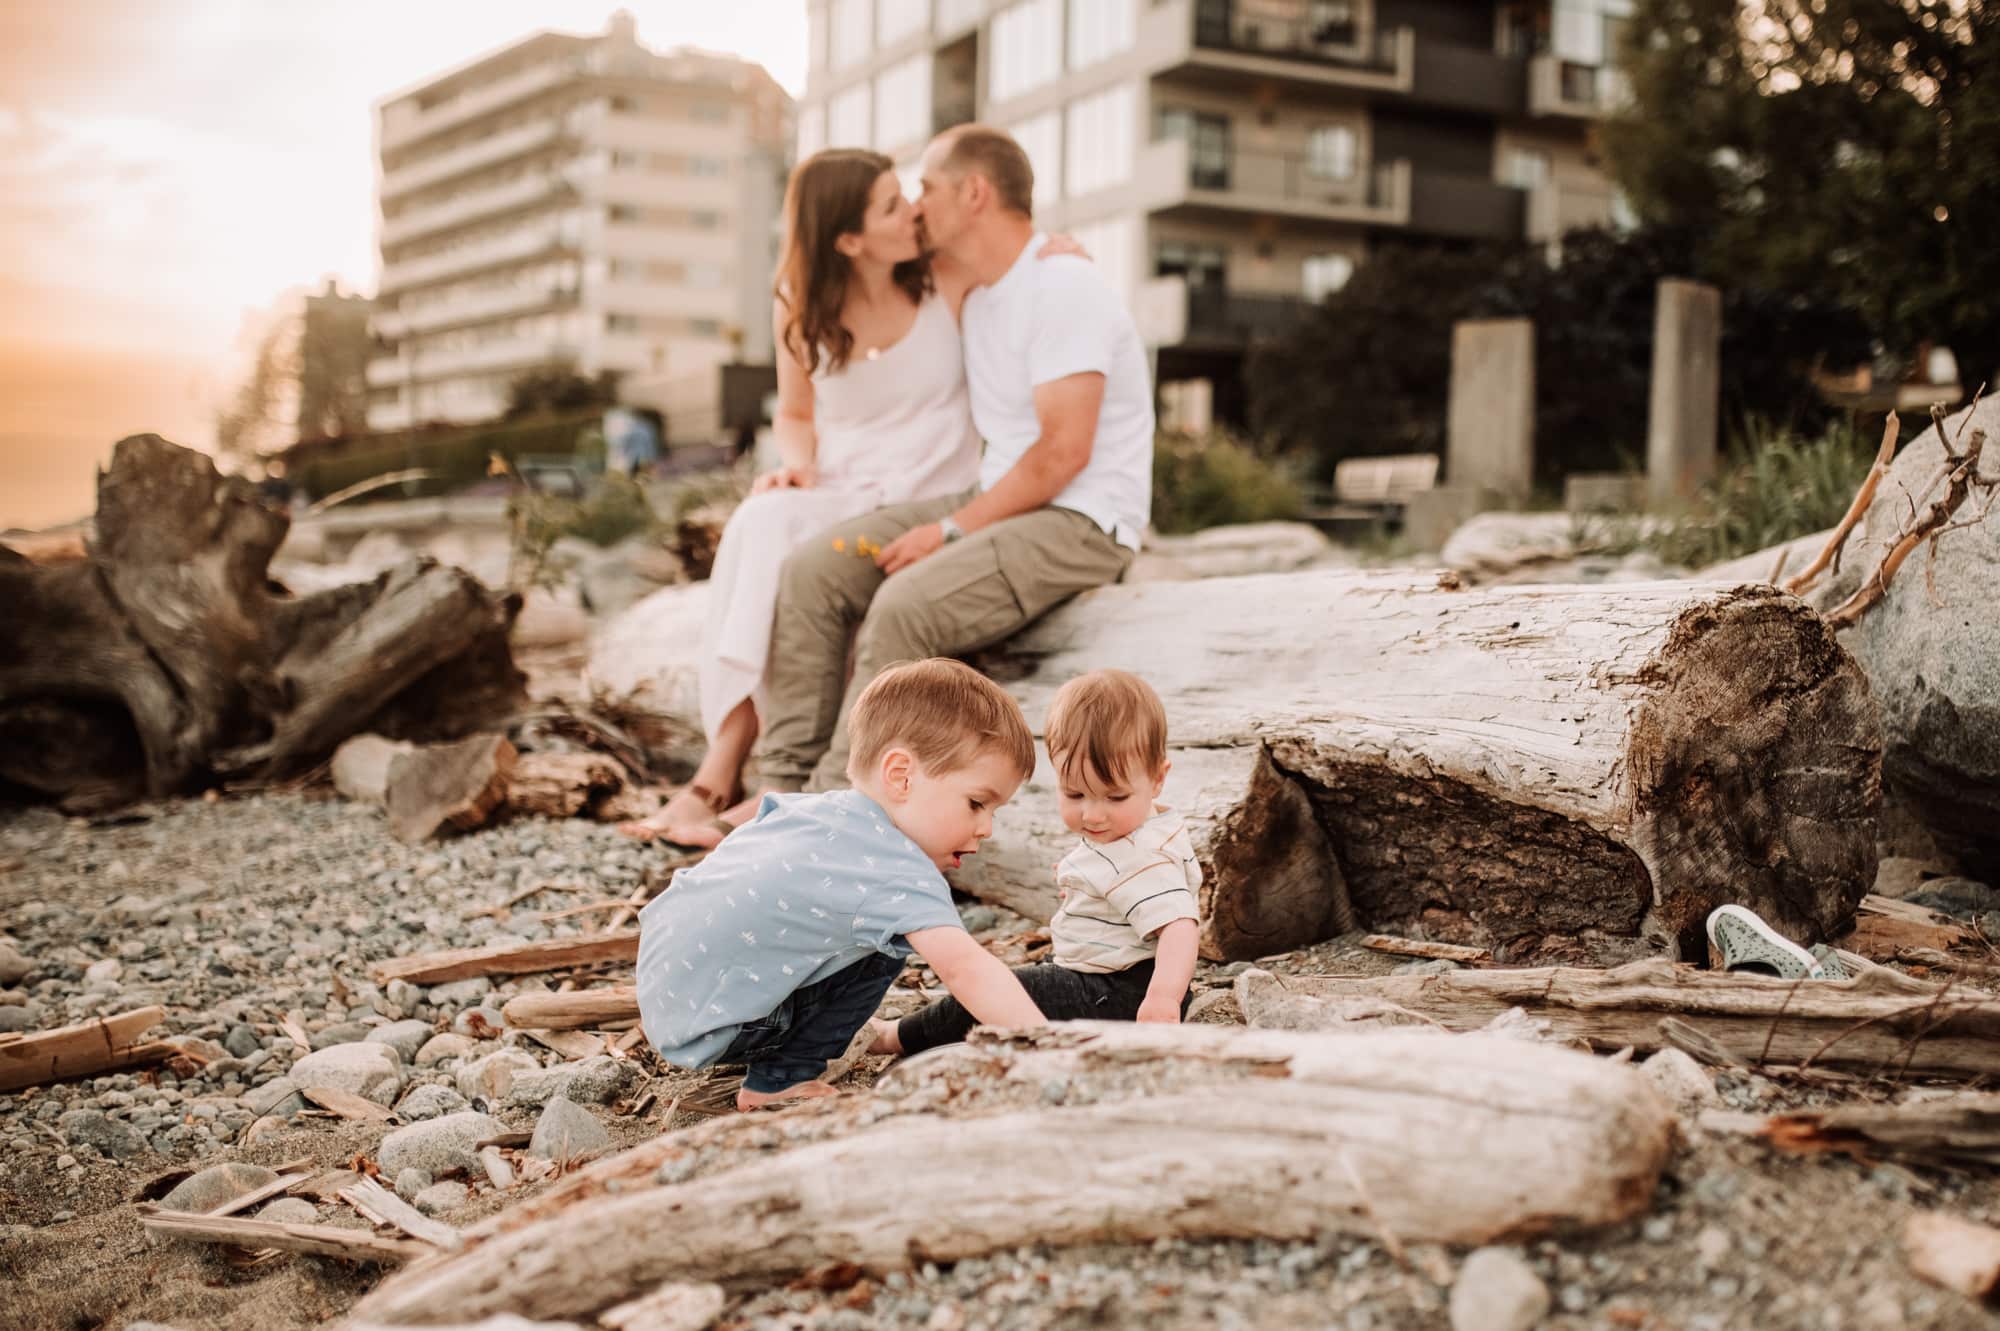 Family photoshoot in West Vancouver shows two small boys playing in the beach sand while their parents kiss in the background.